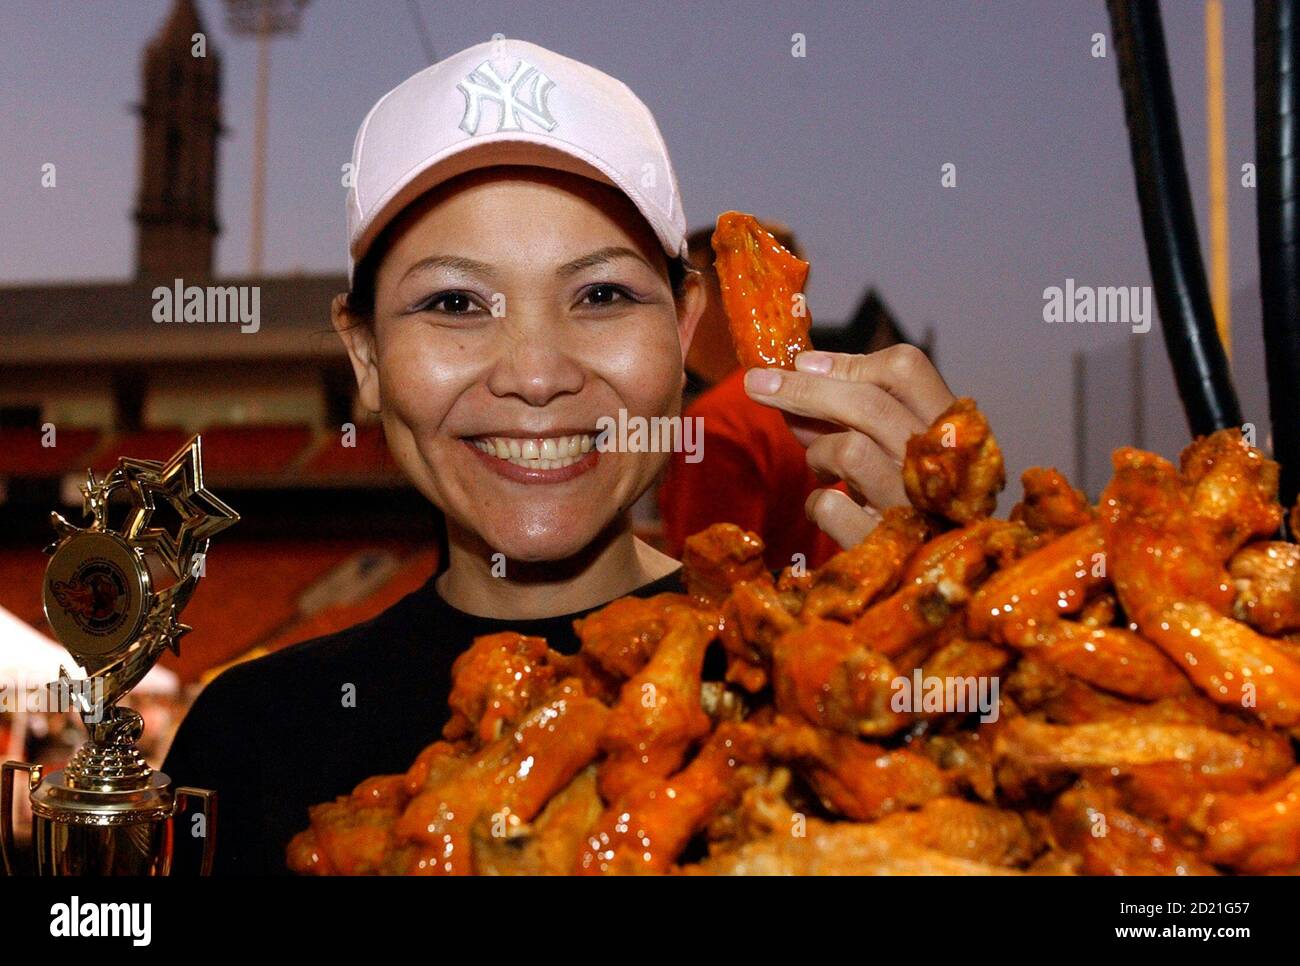 "The Black Widow" Thomas celebrates after taking first place in the National Wing Festival chicken wing eating contest in Buffalo, New York August 30, 2008. REUTERS/Gary Wiepert (UNITED STATES Stock Photo -